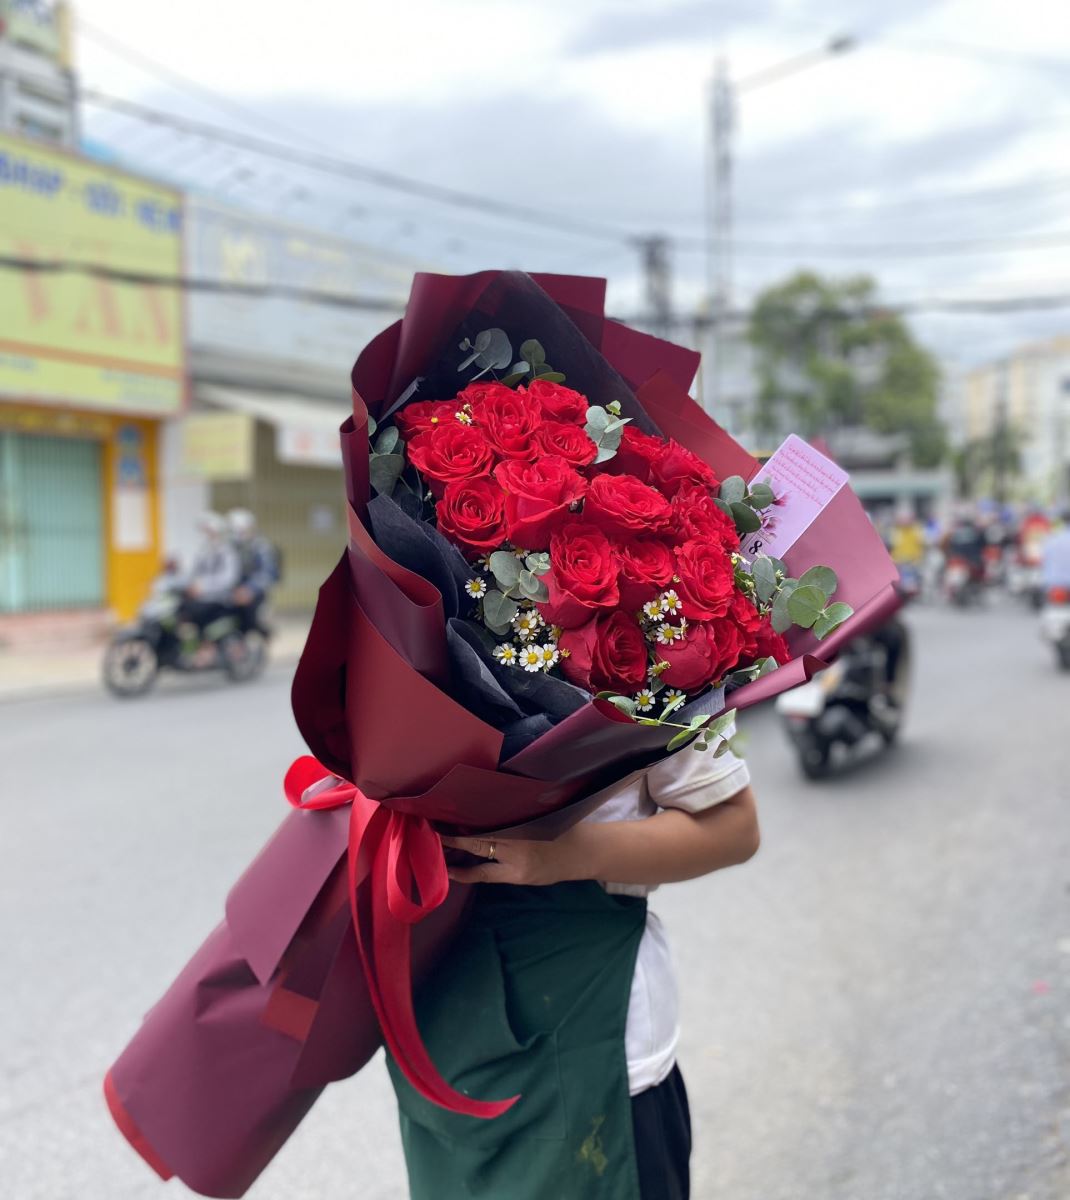 Red rose bouquet ỏ Mothers day in Hanoi